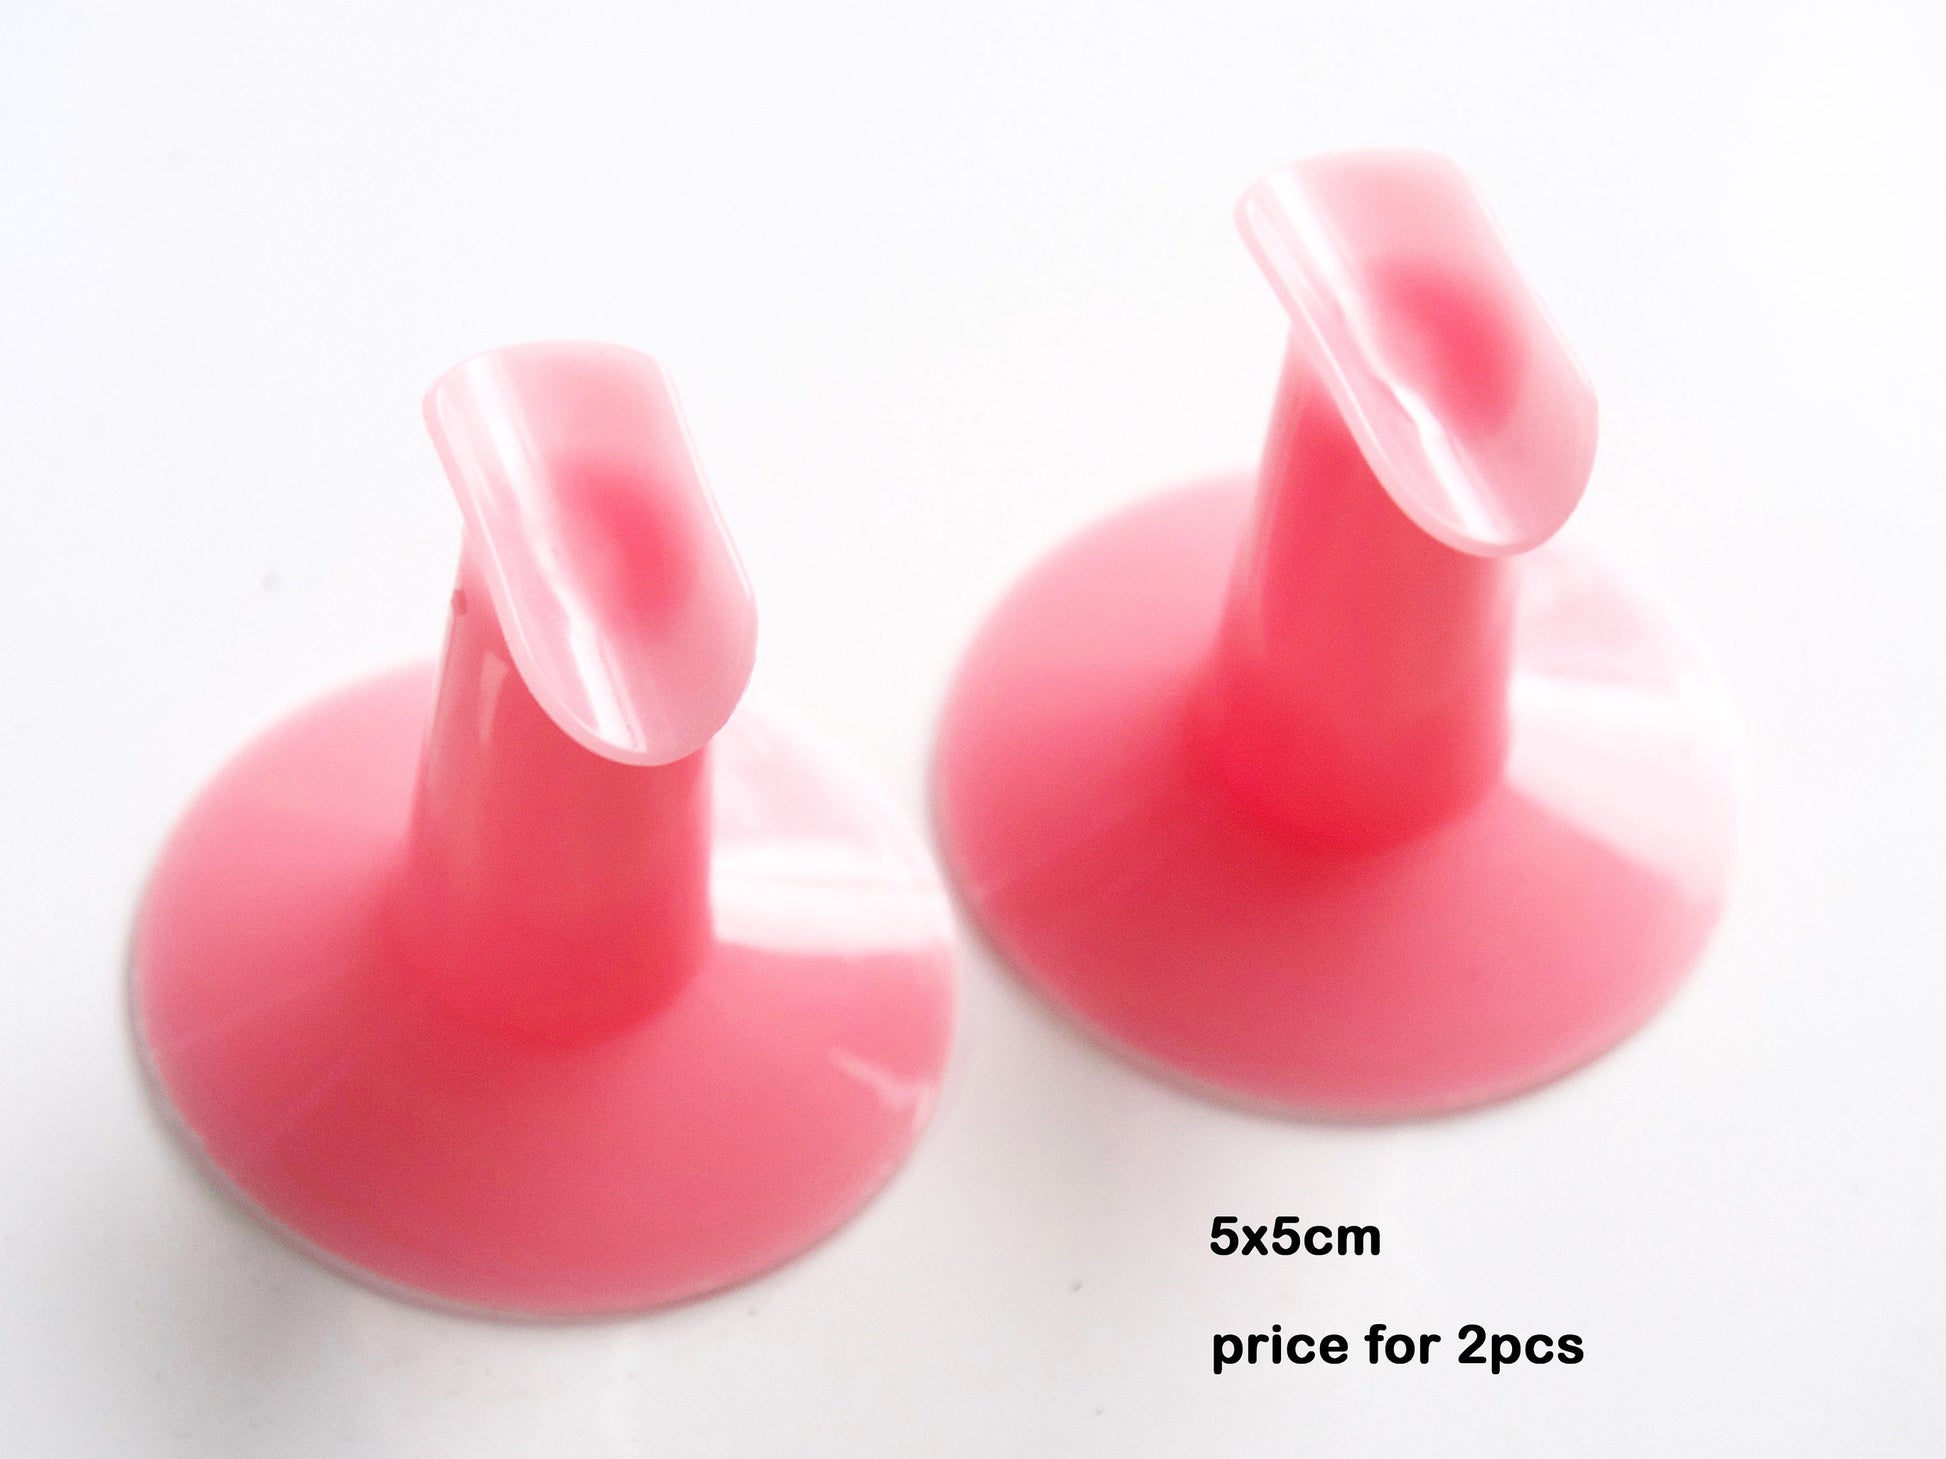 2pcs Plastic Finger Stand Support Stabilized Holder/ Fingers Rest Holder for Nail Art Design Nail Technician Painting tool Nail polish